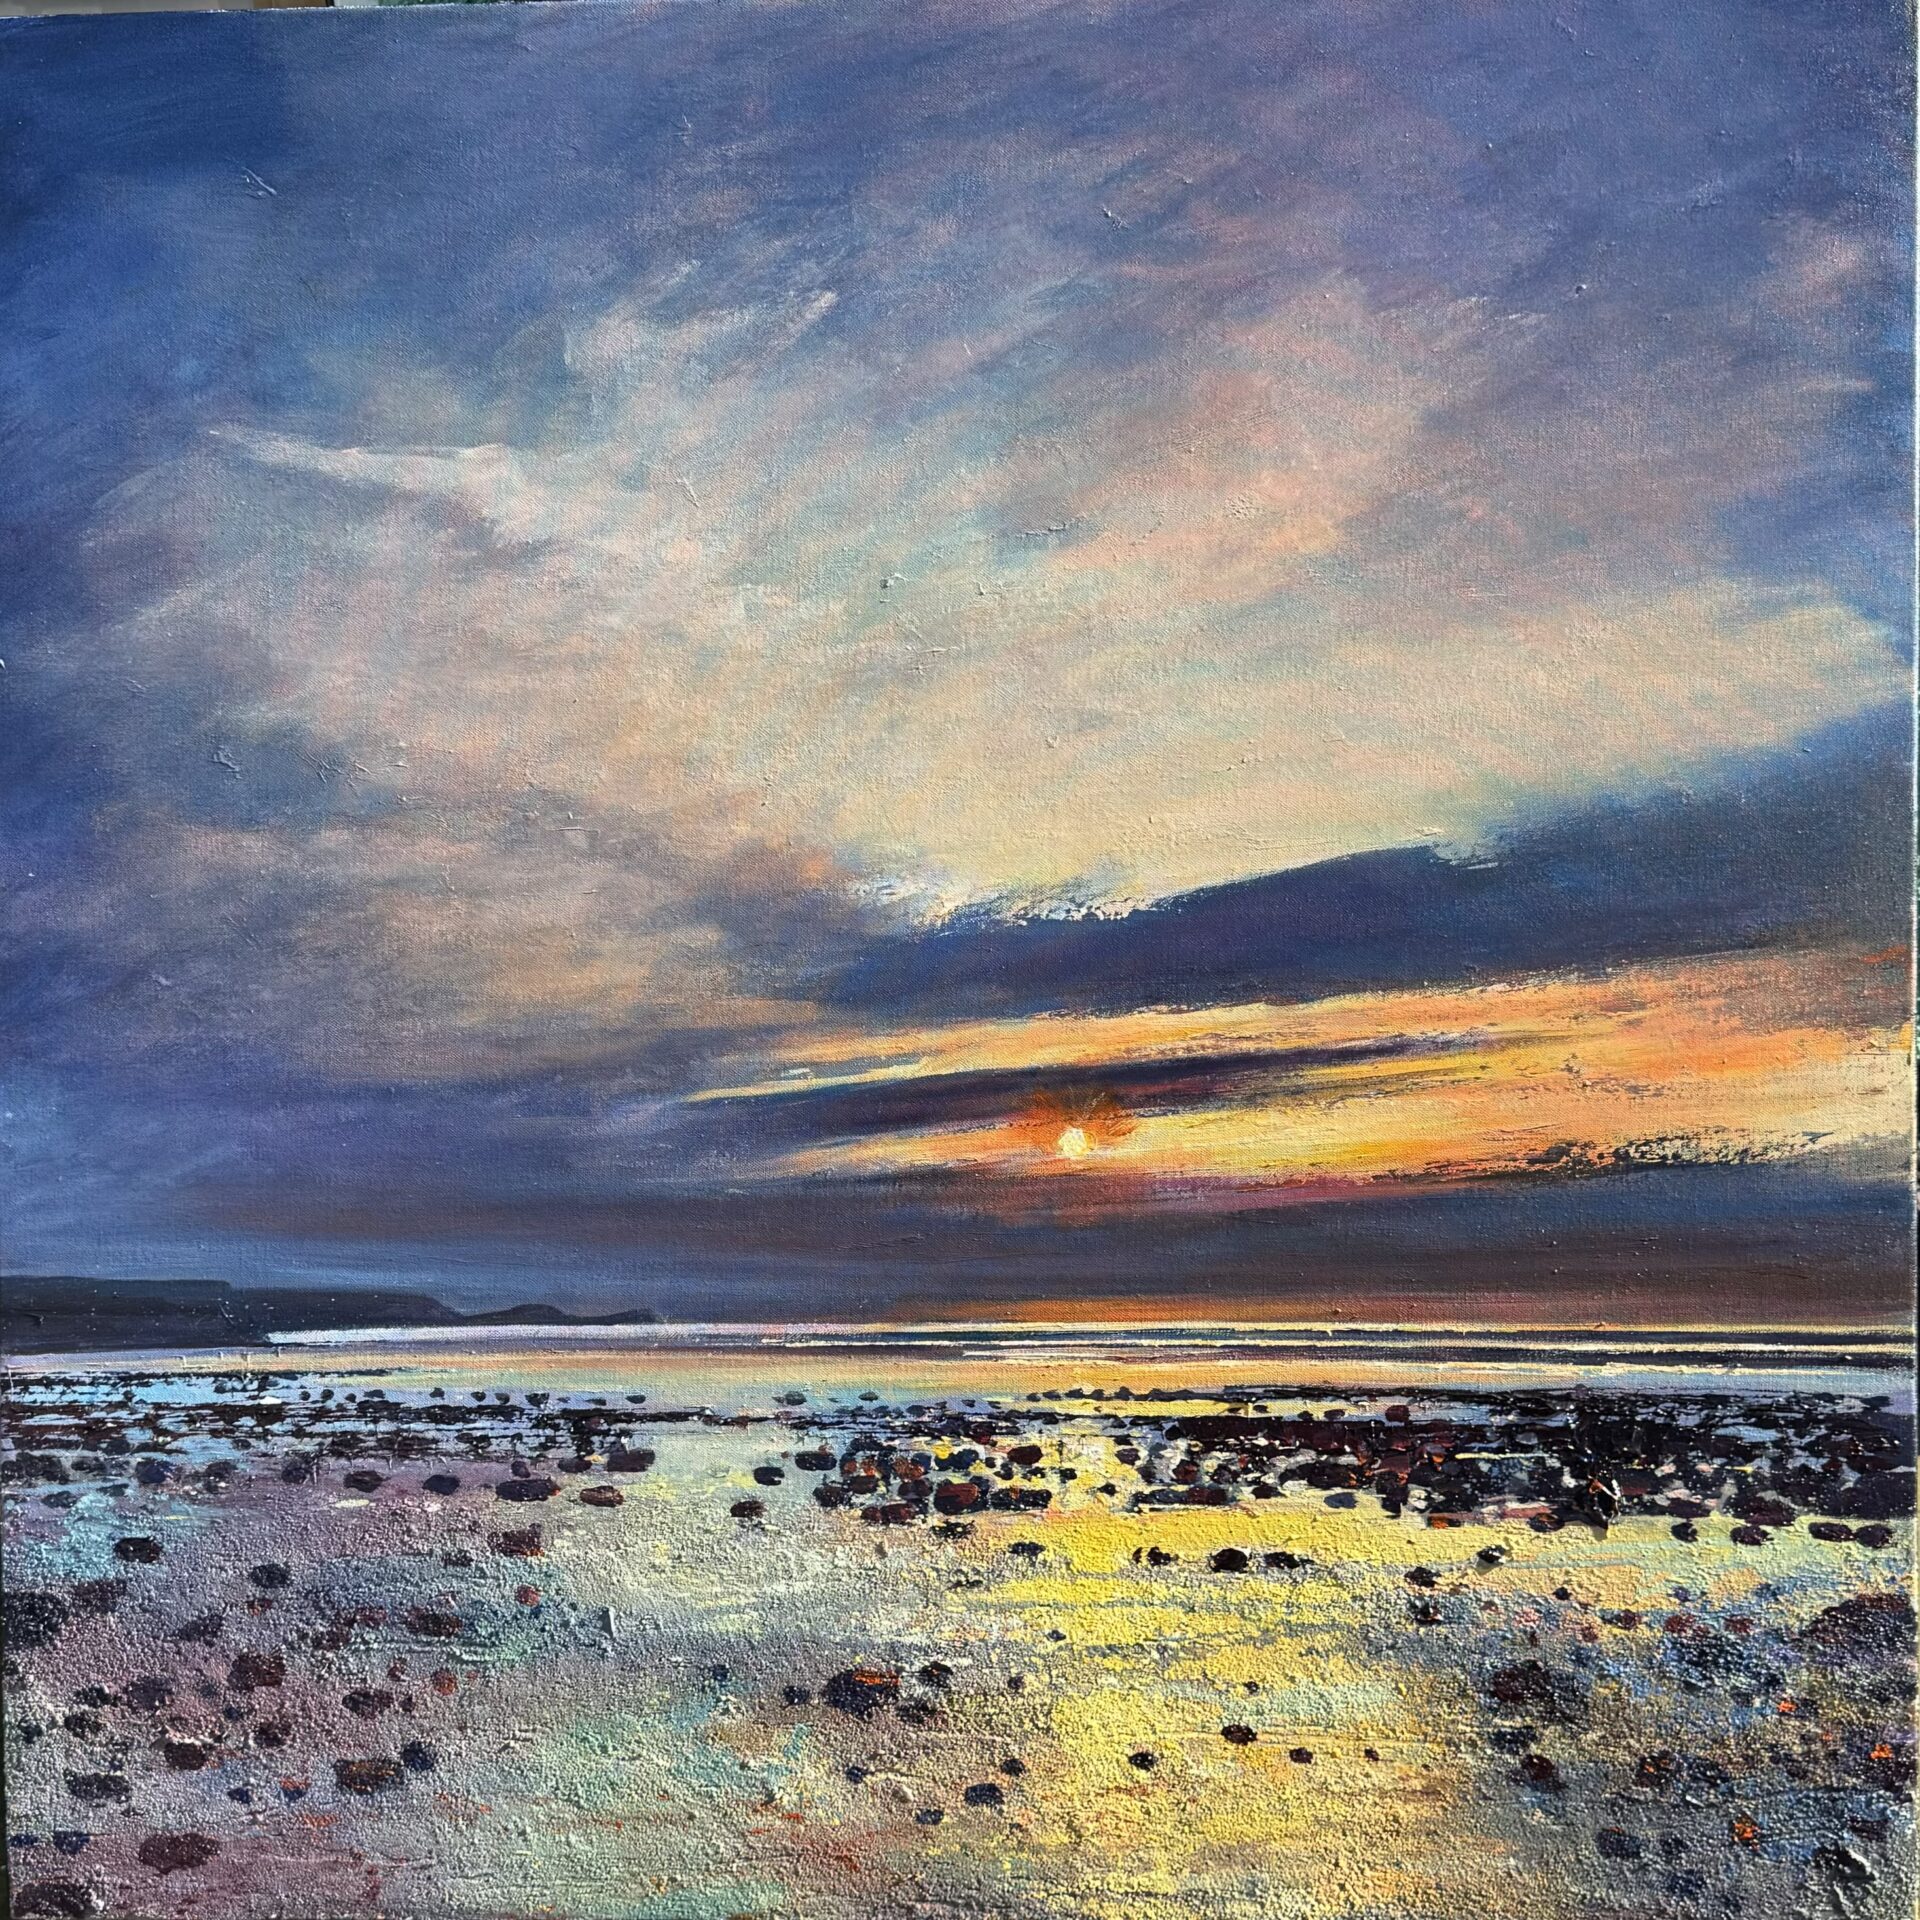 Northern Rockpools seascape painting by John Connolly